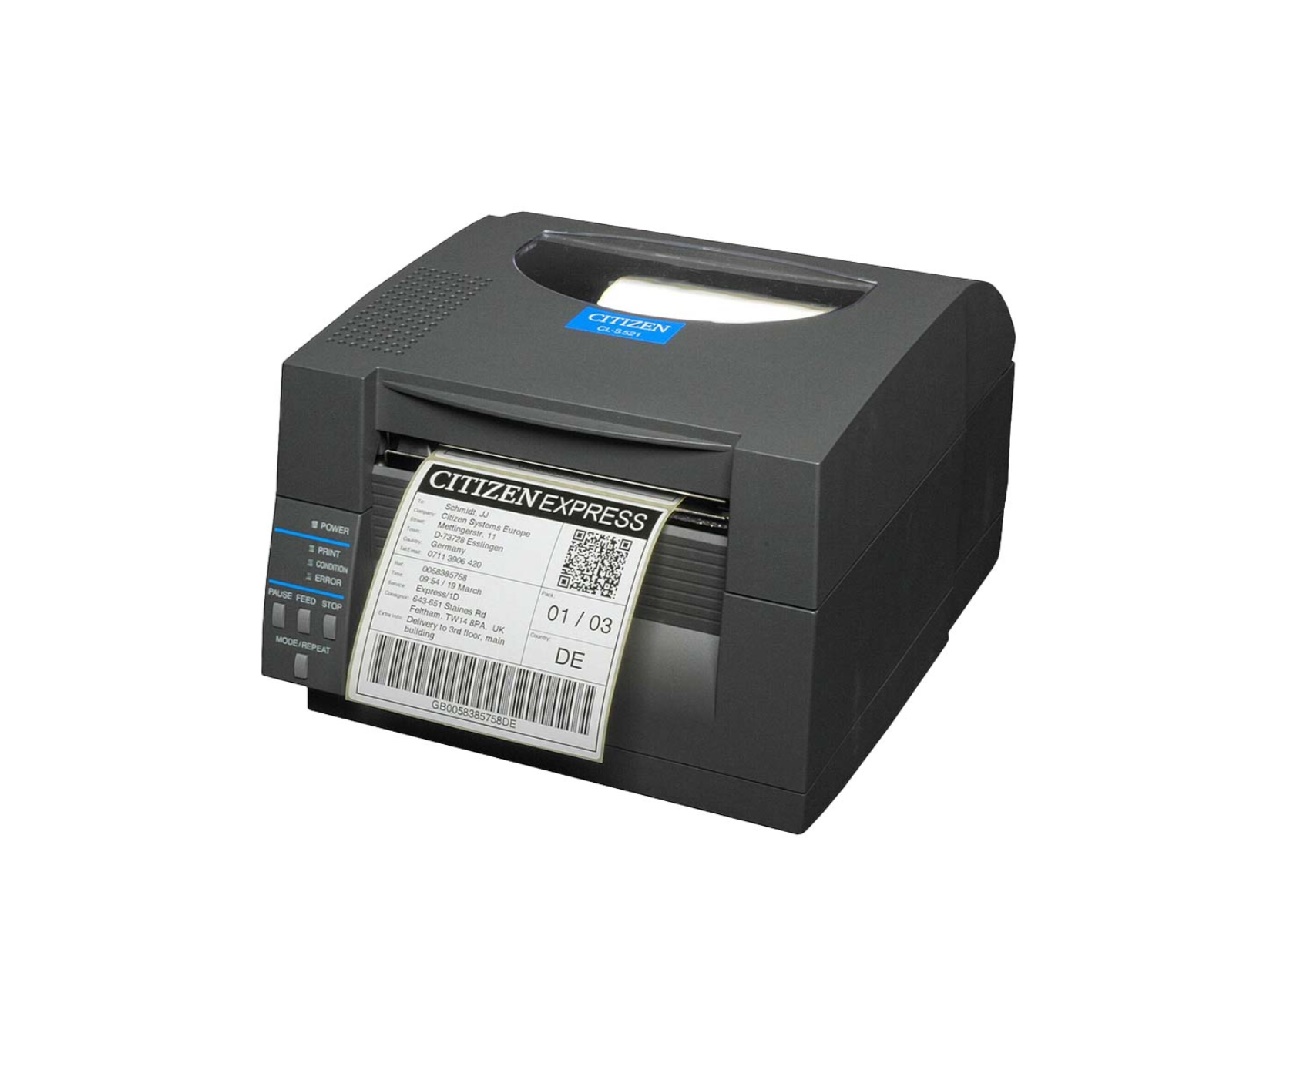 Citizen CL-S521 Typeii Direct Thermal/Thermal Transfer 300dpi Wi-Fi CL-S521II-WUBK